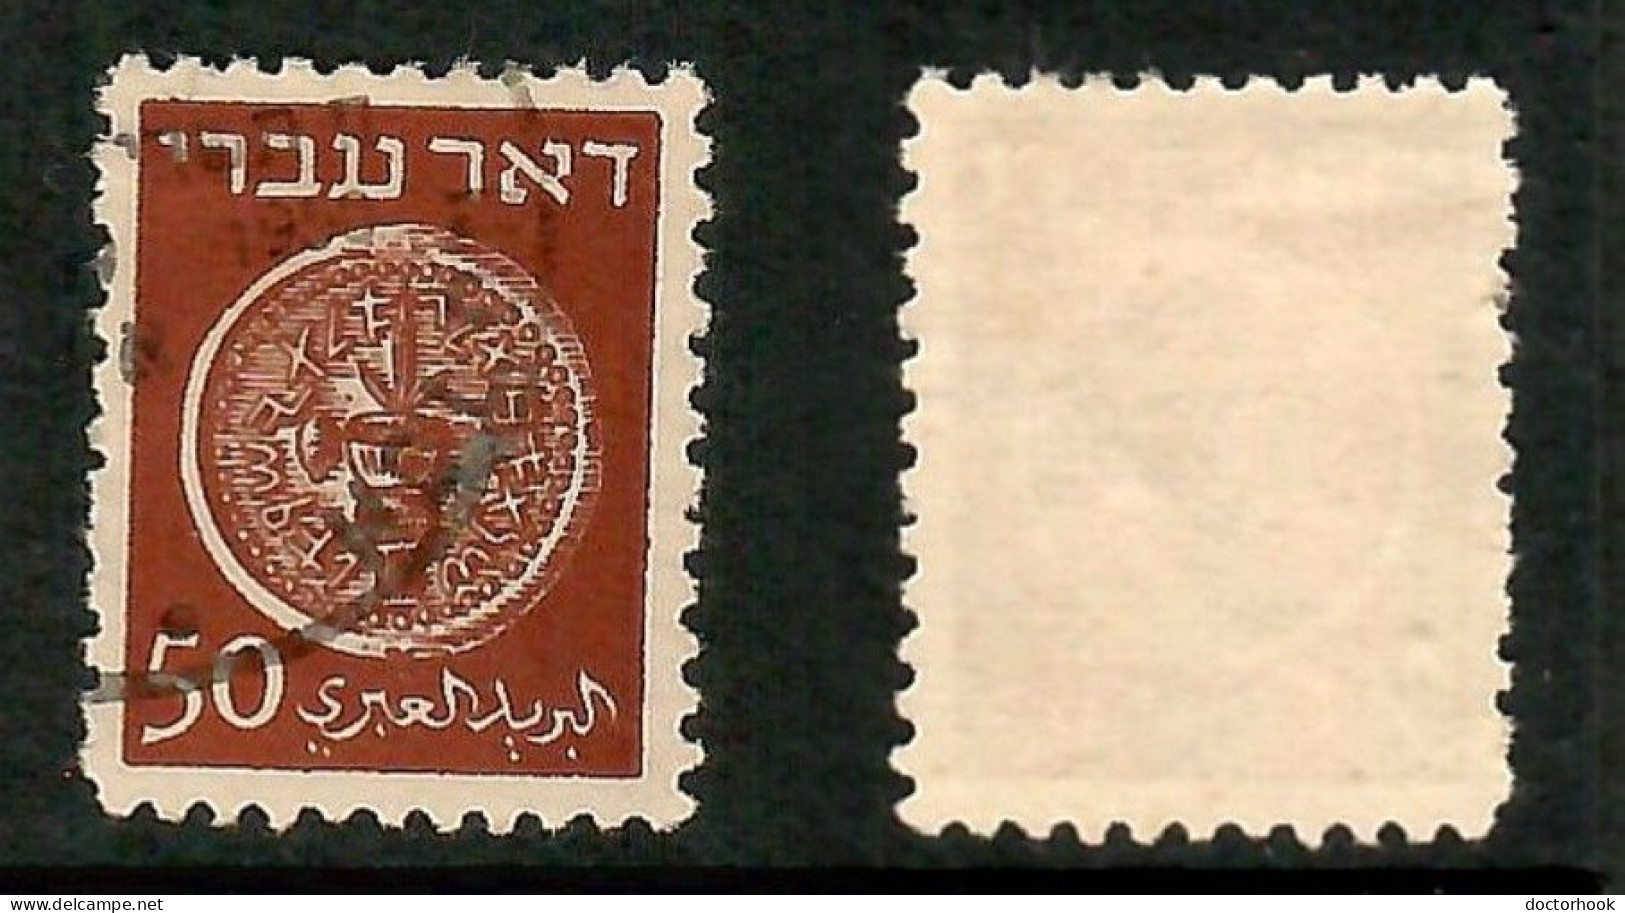 ISRAEL   Scott # 6 USED (CONDITION AS PER SCAN) (Stamp Scan # 991-9) - Usati (senza Tab)